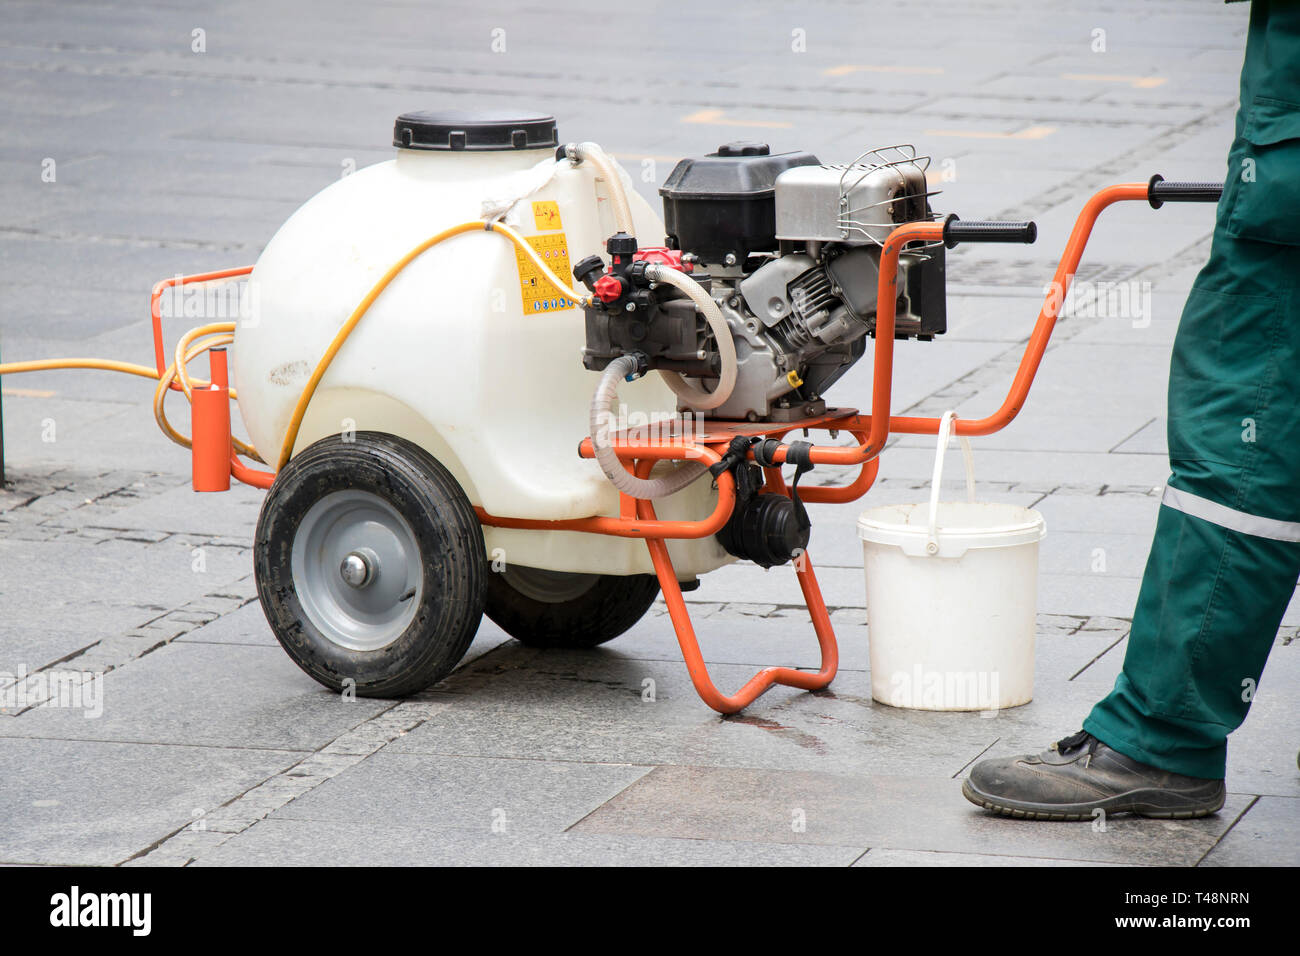 Watercart on wheels, portable watering system on pedestrian street, close up Stock Photo